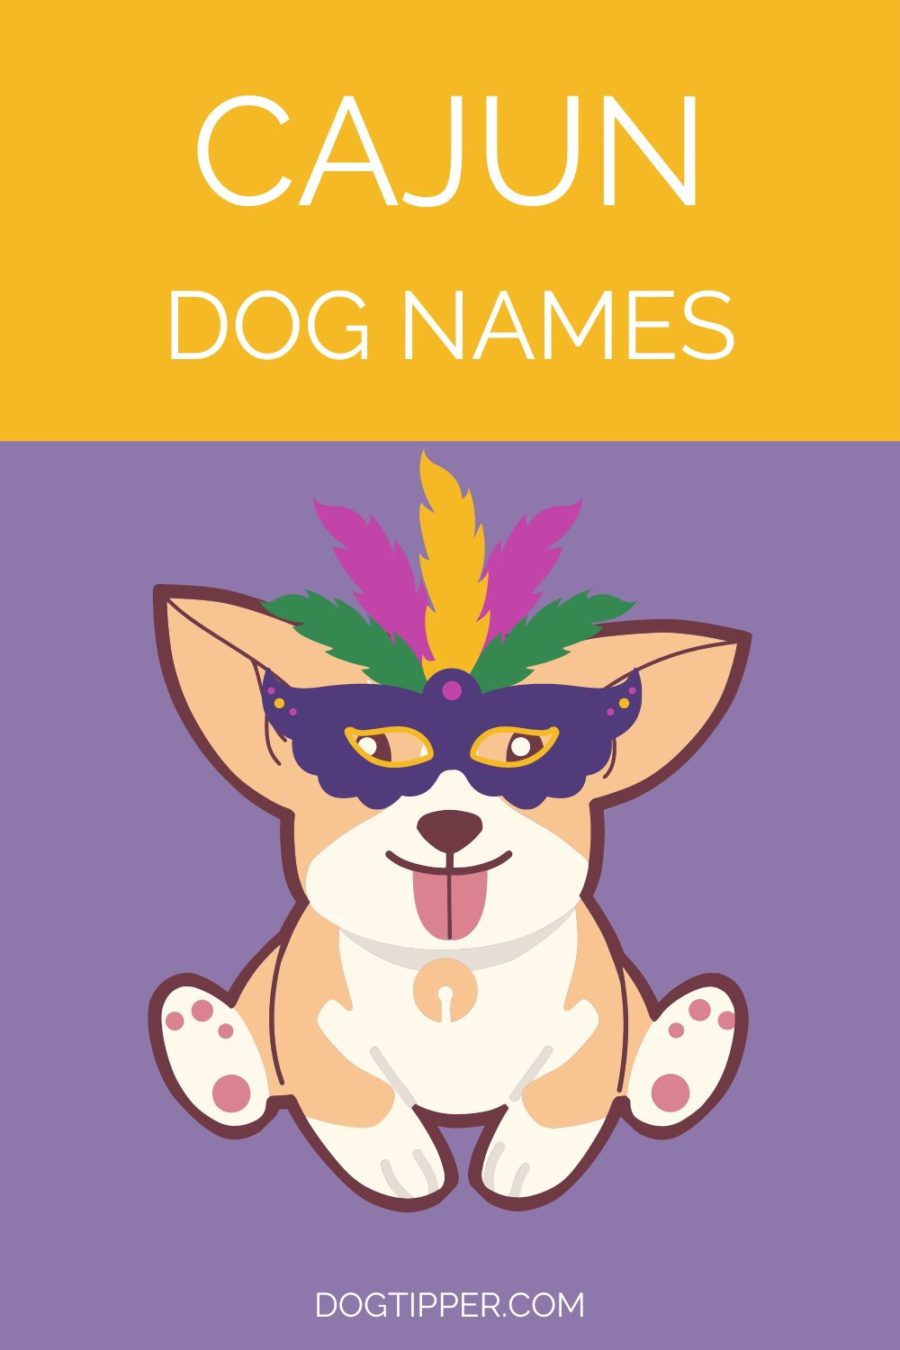 Cajun Dog Names - Dog Names inspired by Cajun foods, Mardi Gras, New Orleans and more